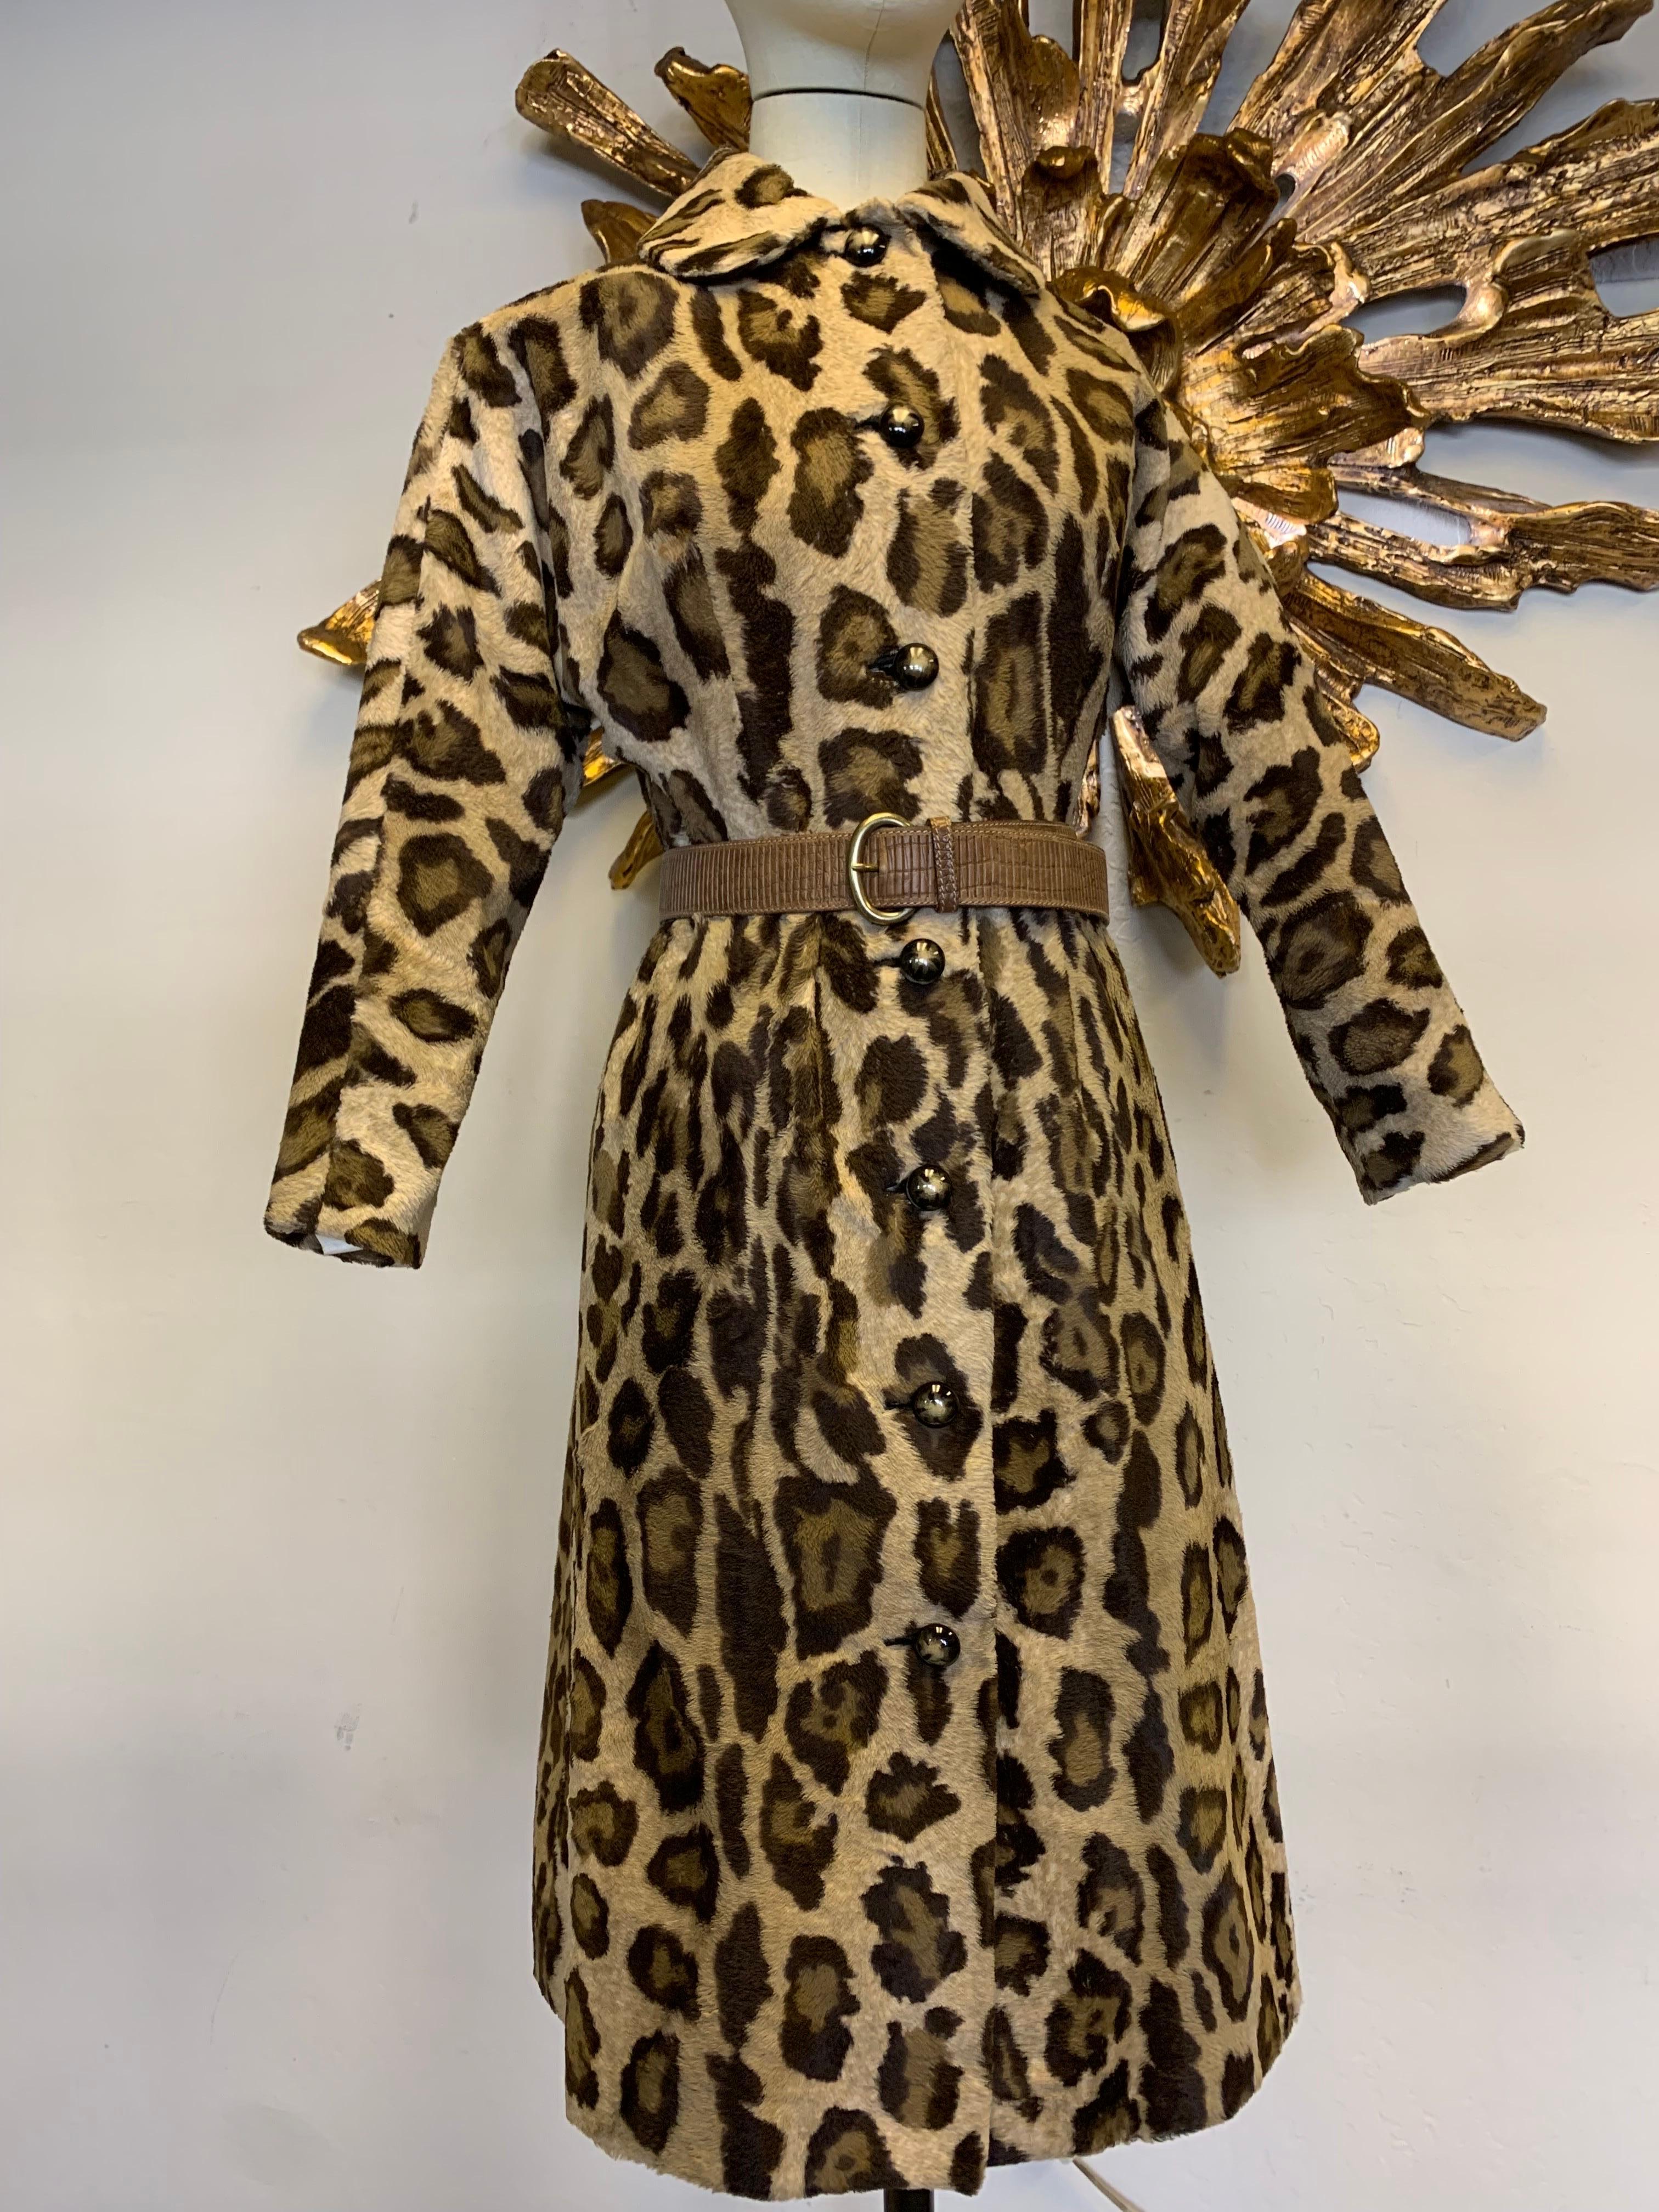 1960s Jerry Silverman Faux Leopard Fur Button-Down Coat Dress: Dolman sleeves with side slit pockets. Includes a modern leather belt by Armani. Fully lined. Size 6-8